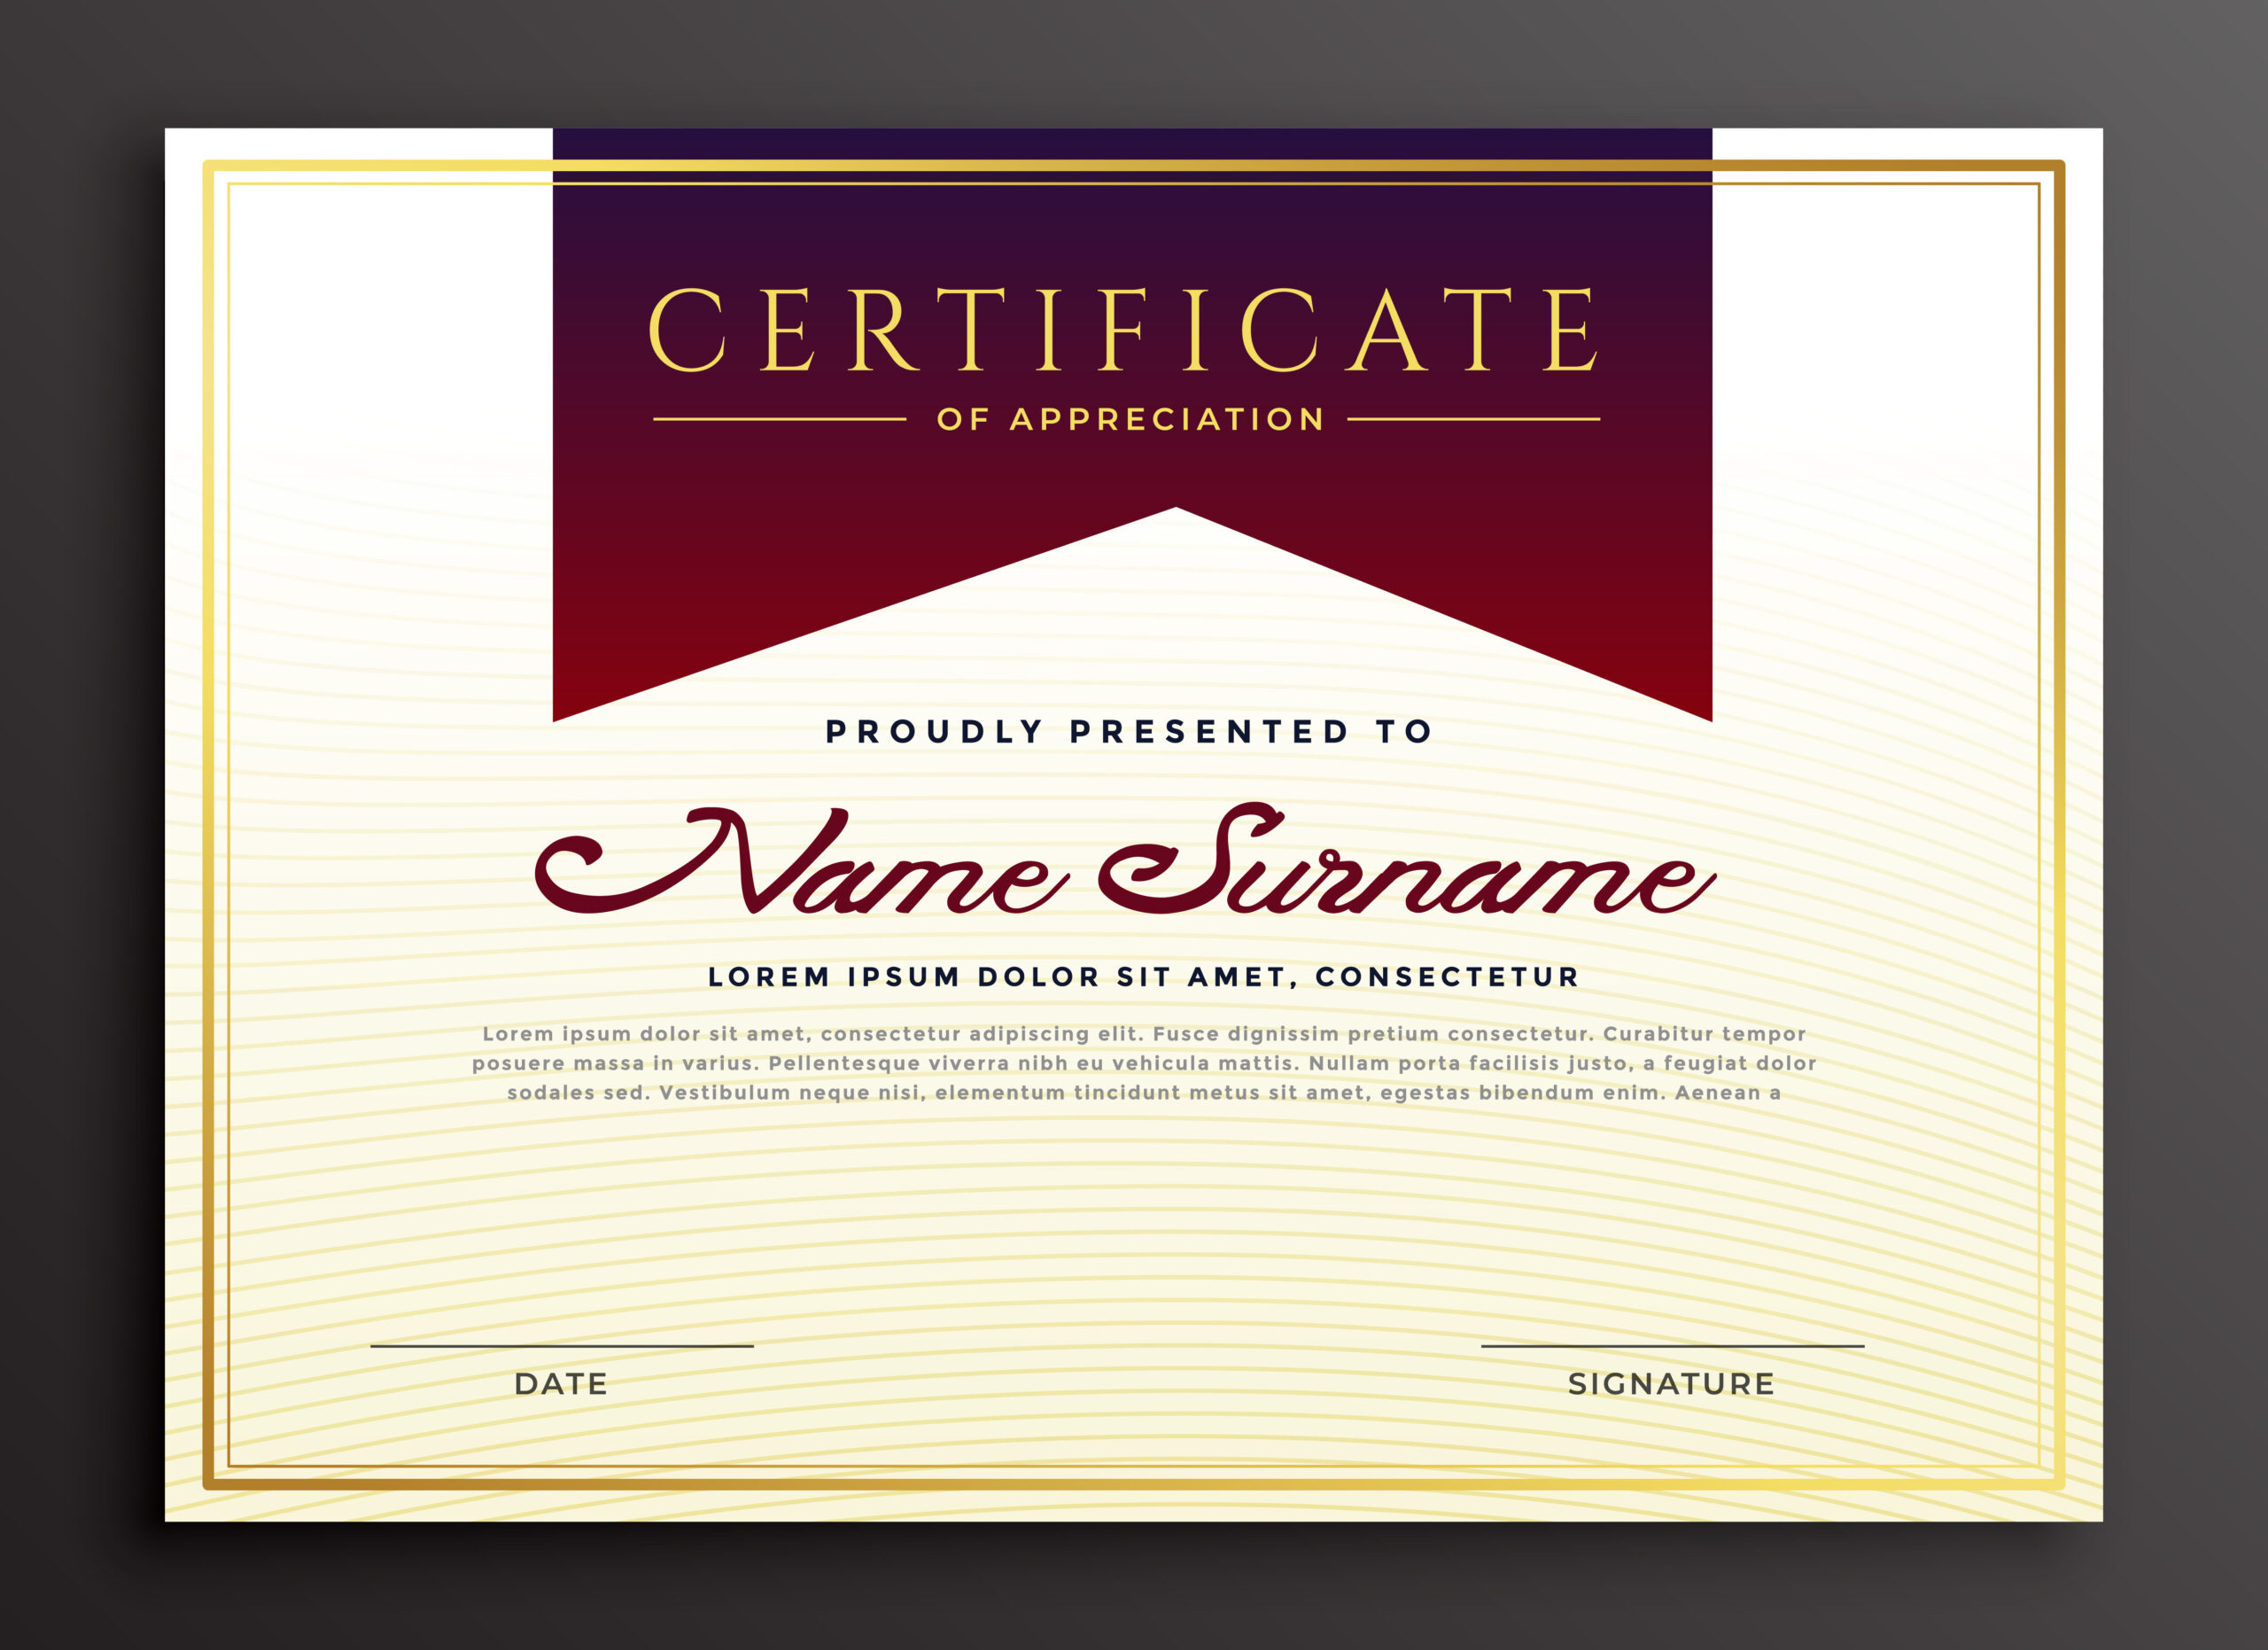 Certificate Of Appreciation Business Template - Download Free Vector intended for Thanks Certificate Template